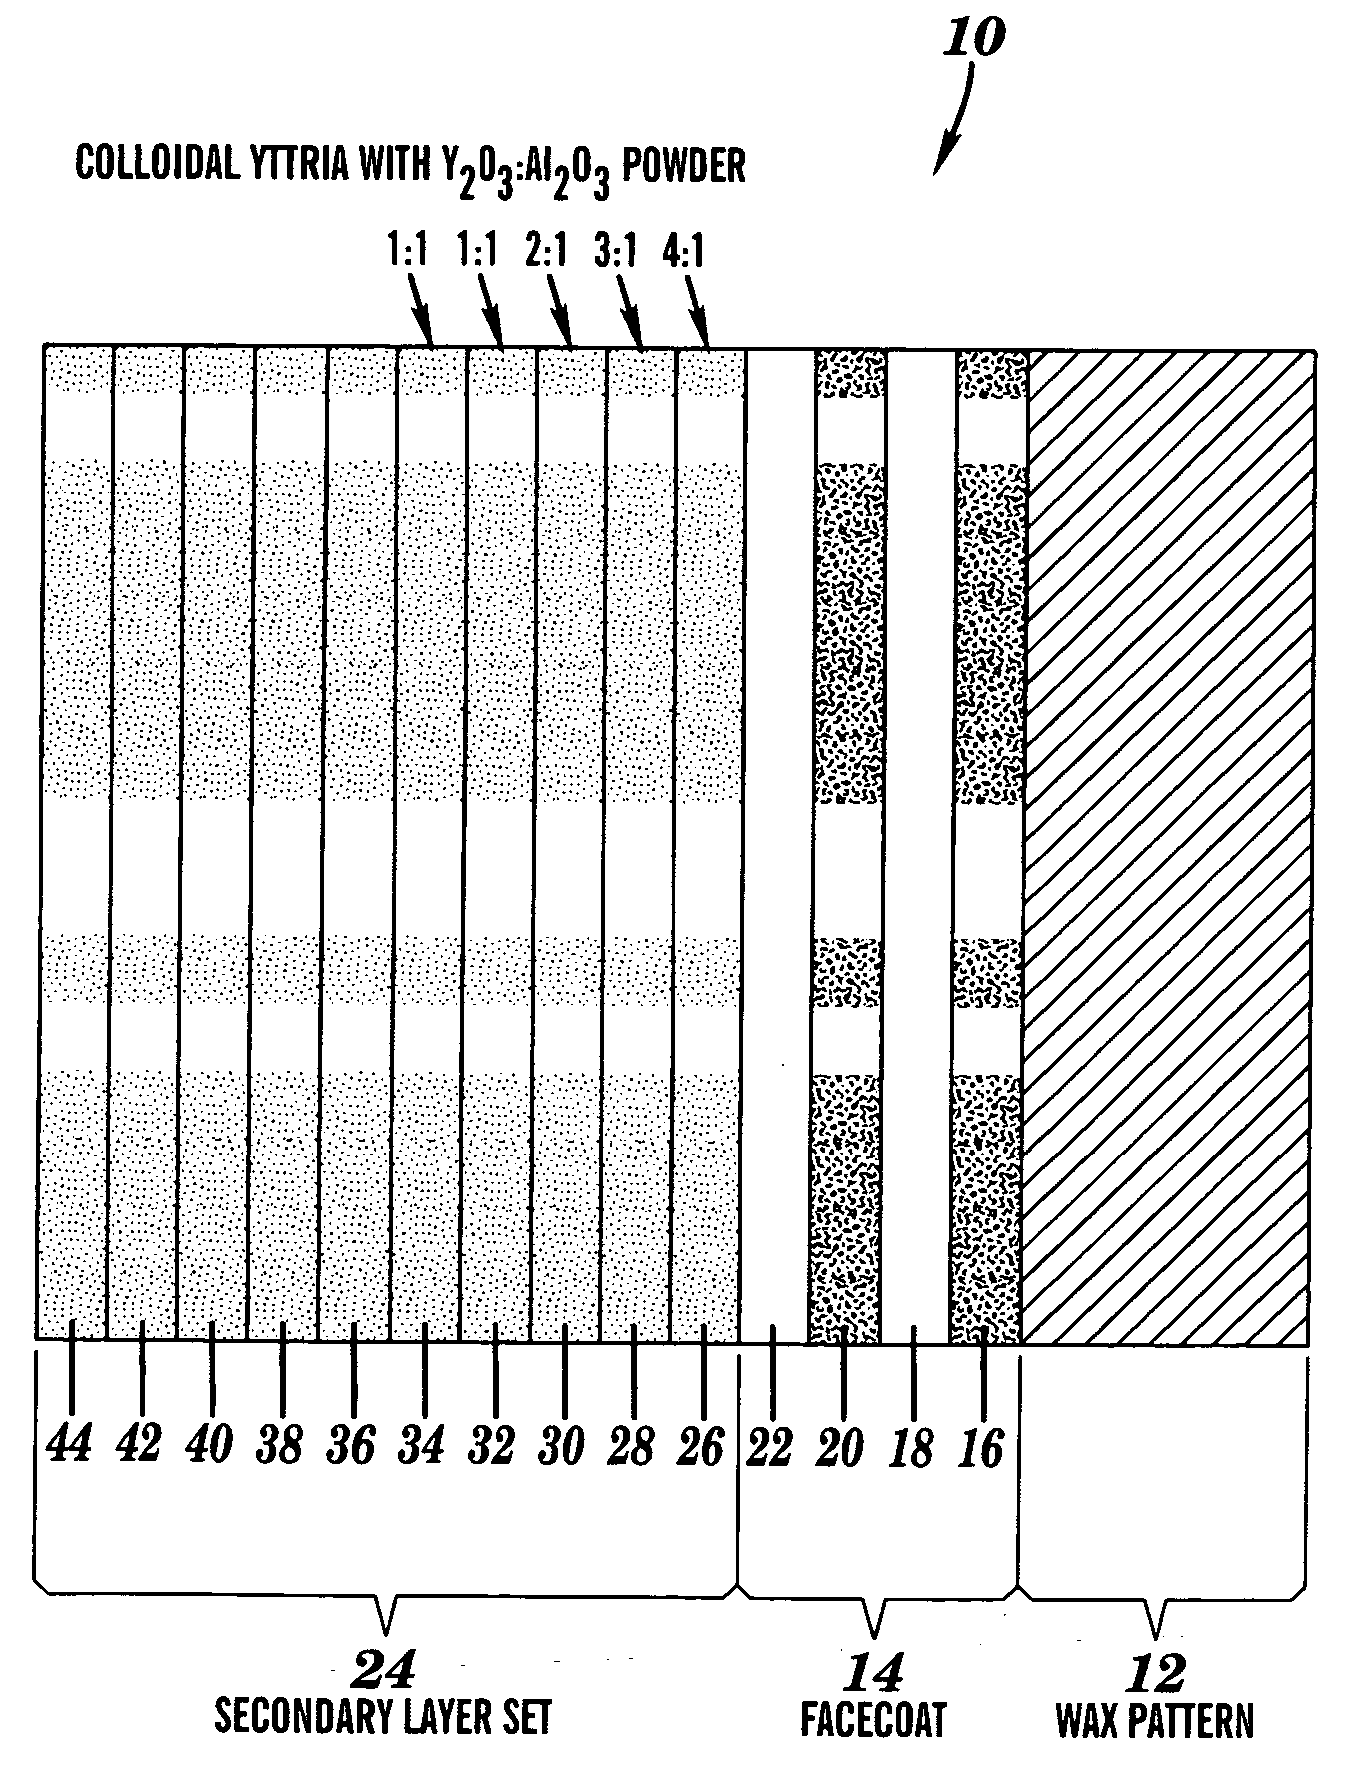 Shell mold for casting niobium-silicide alloys, and related compositions and processes